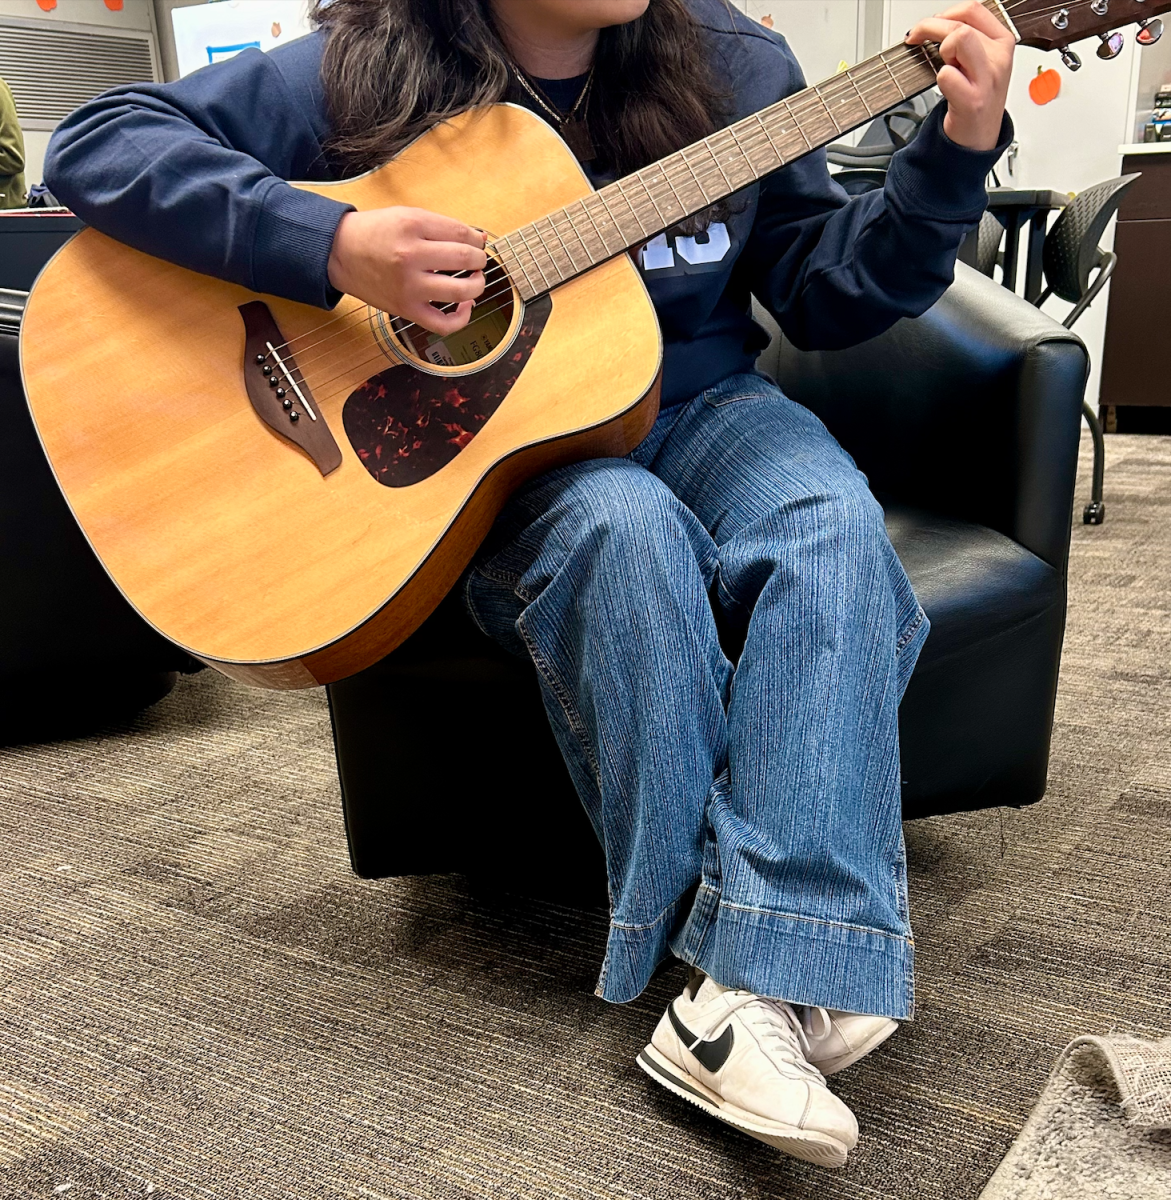 Belen Estrada serenades her friends with a song—La Llorona—she recently learned on the guitar, at the school lounge.